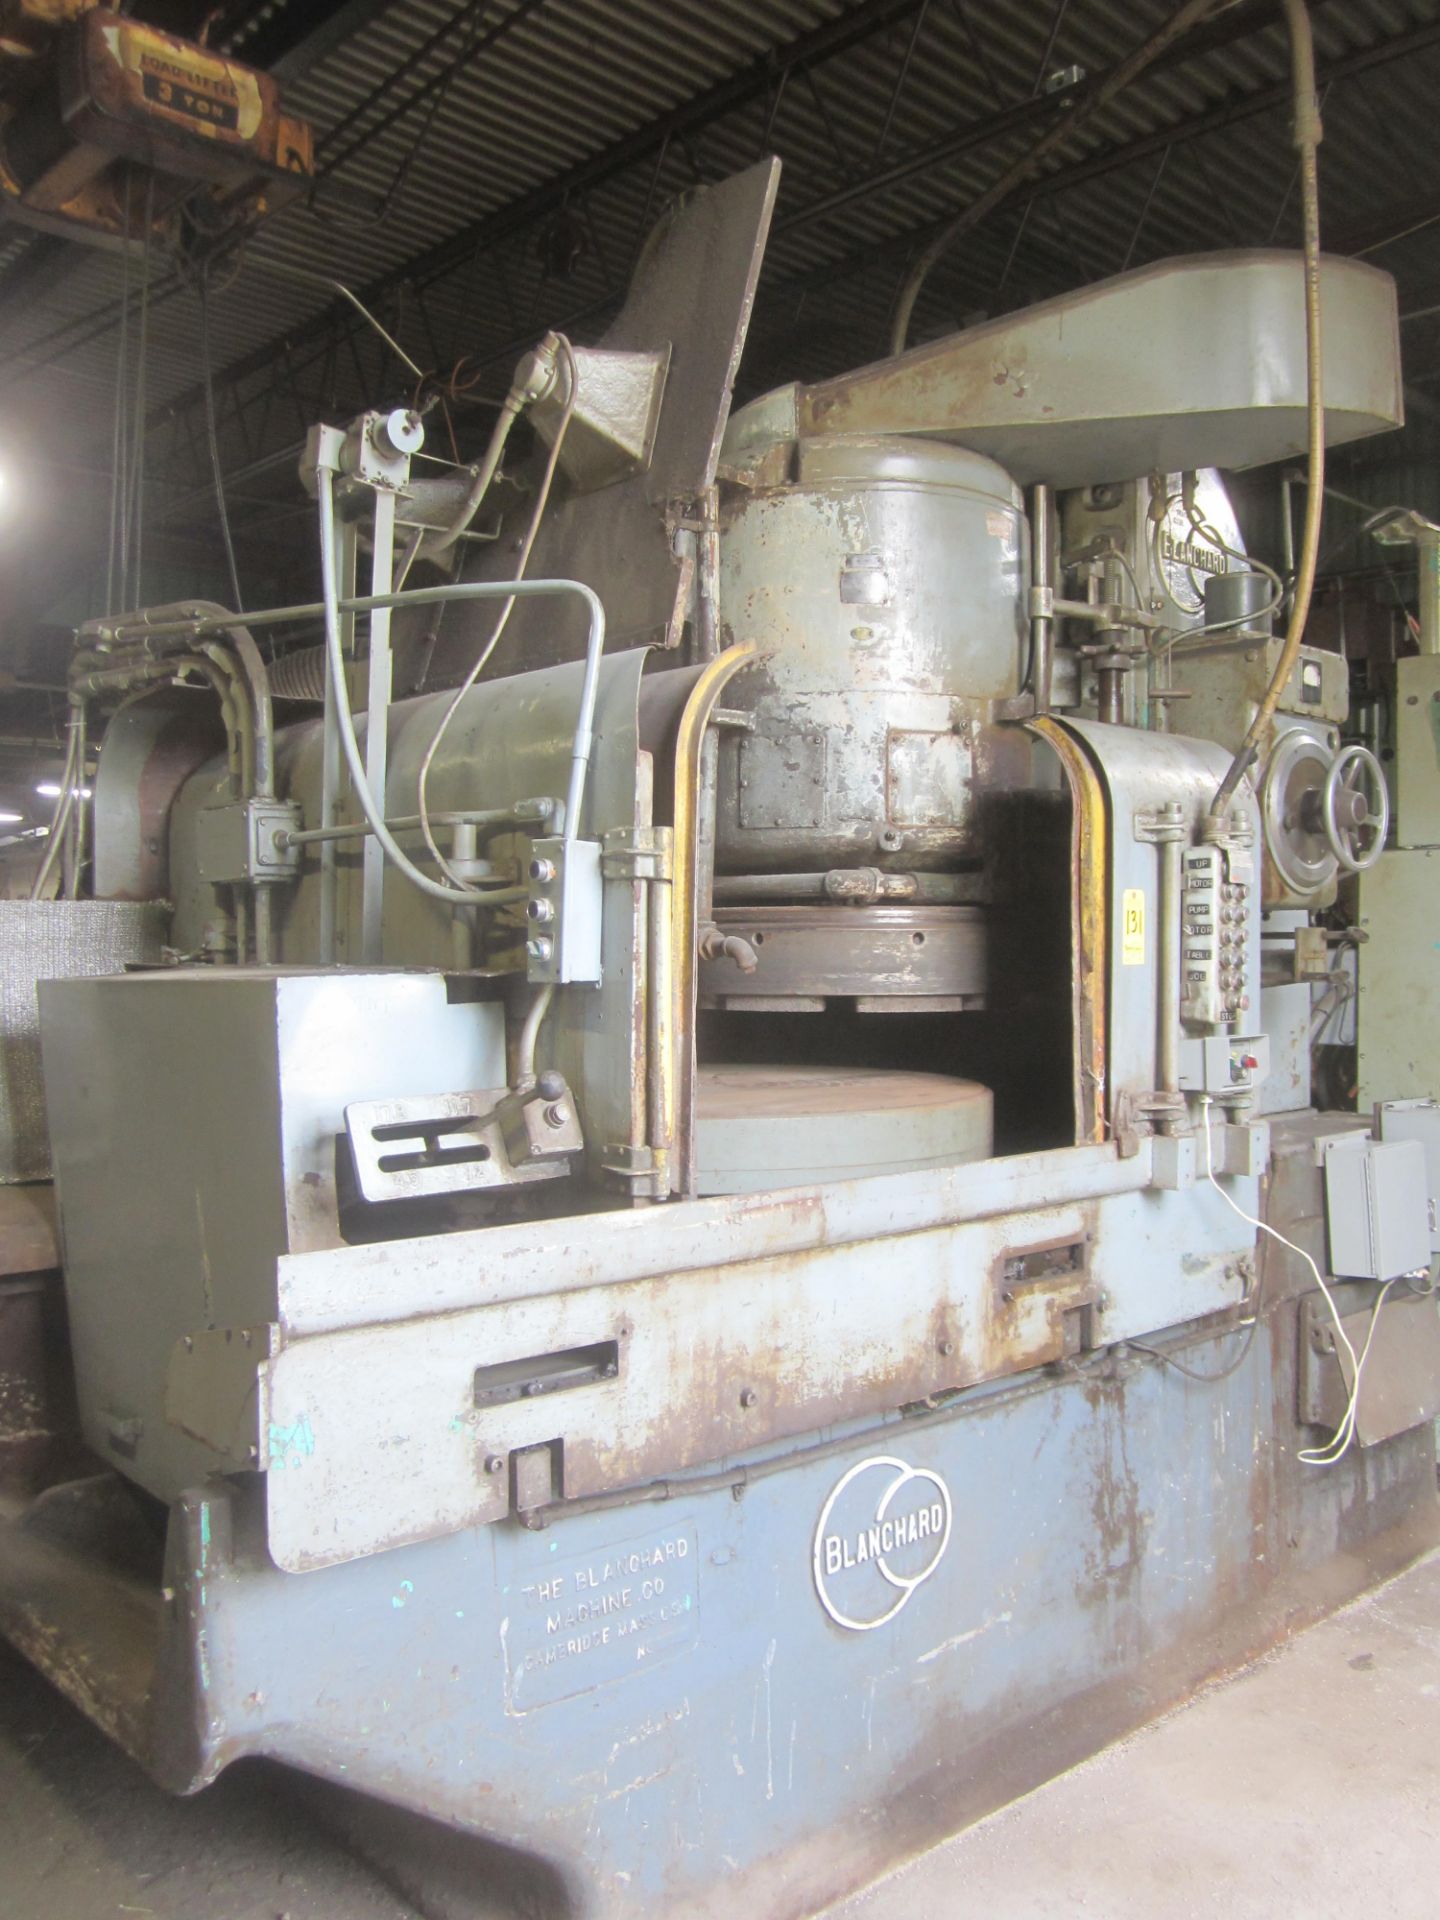 Blanchard 48" Rotary Surface Grinder, s/n 9802, 24" Segmented Wheel, Magnetic Chuck Recently Rebuilt - Image 3 of 15